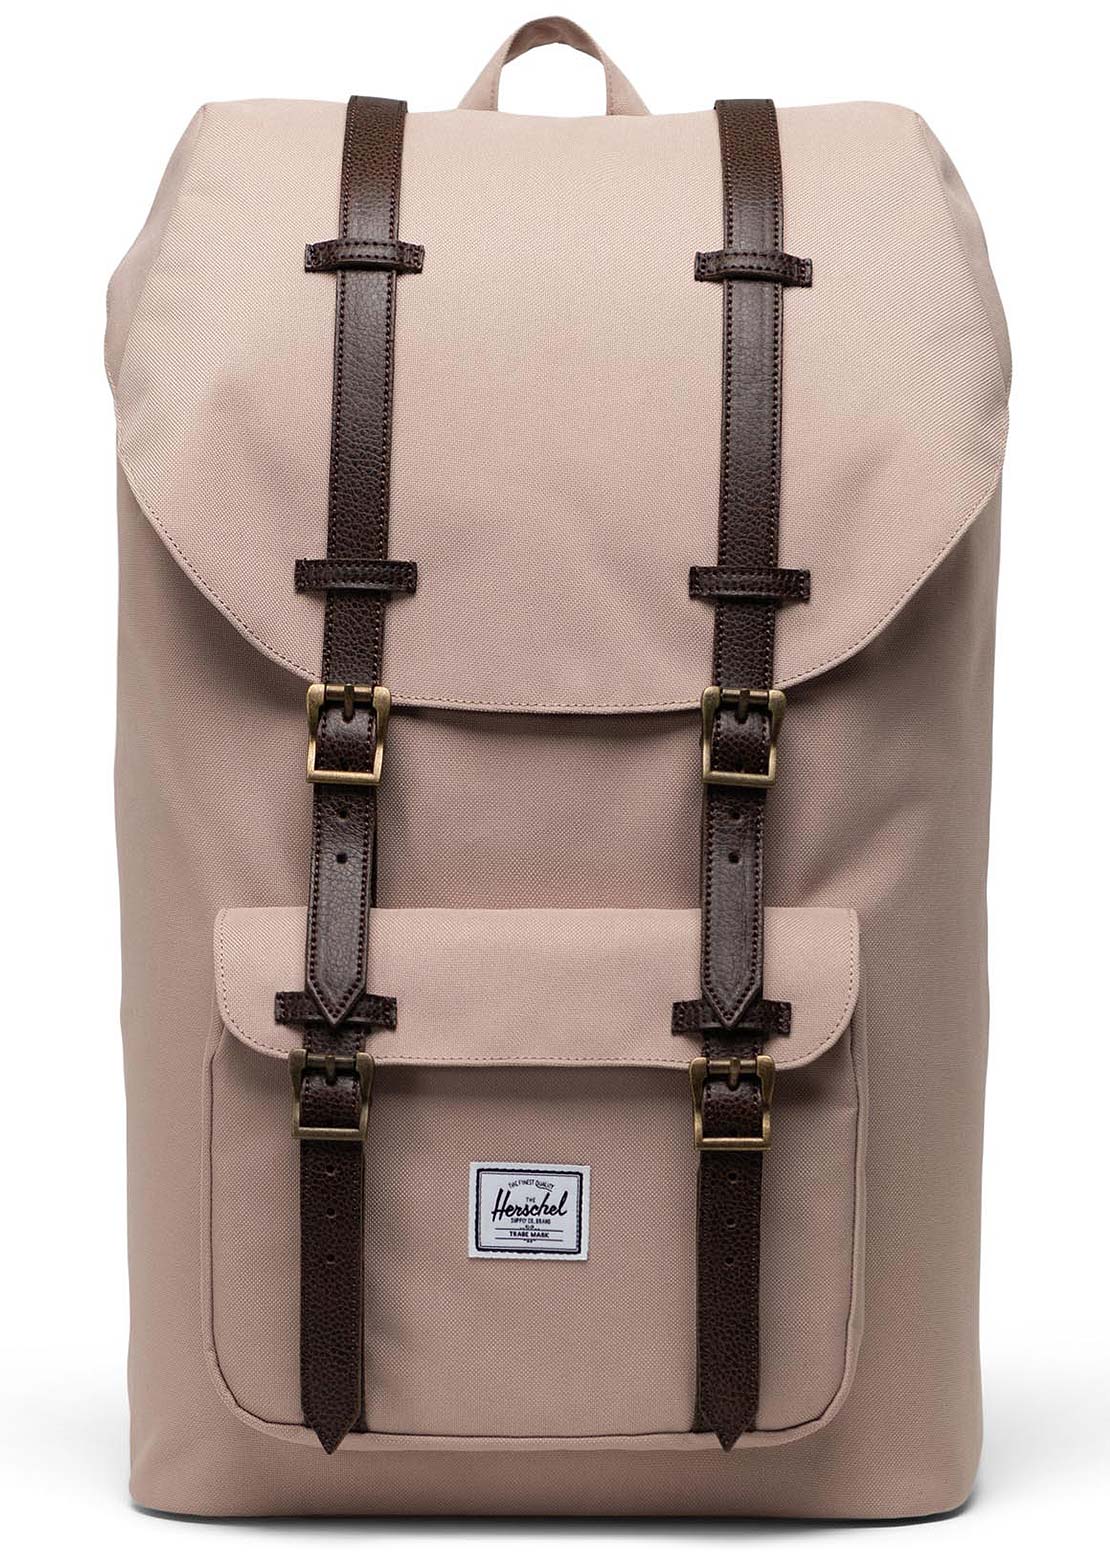 Herschel Little America Backpack Light Taupe/Chicory Coffee